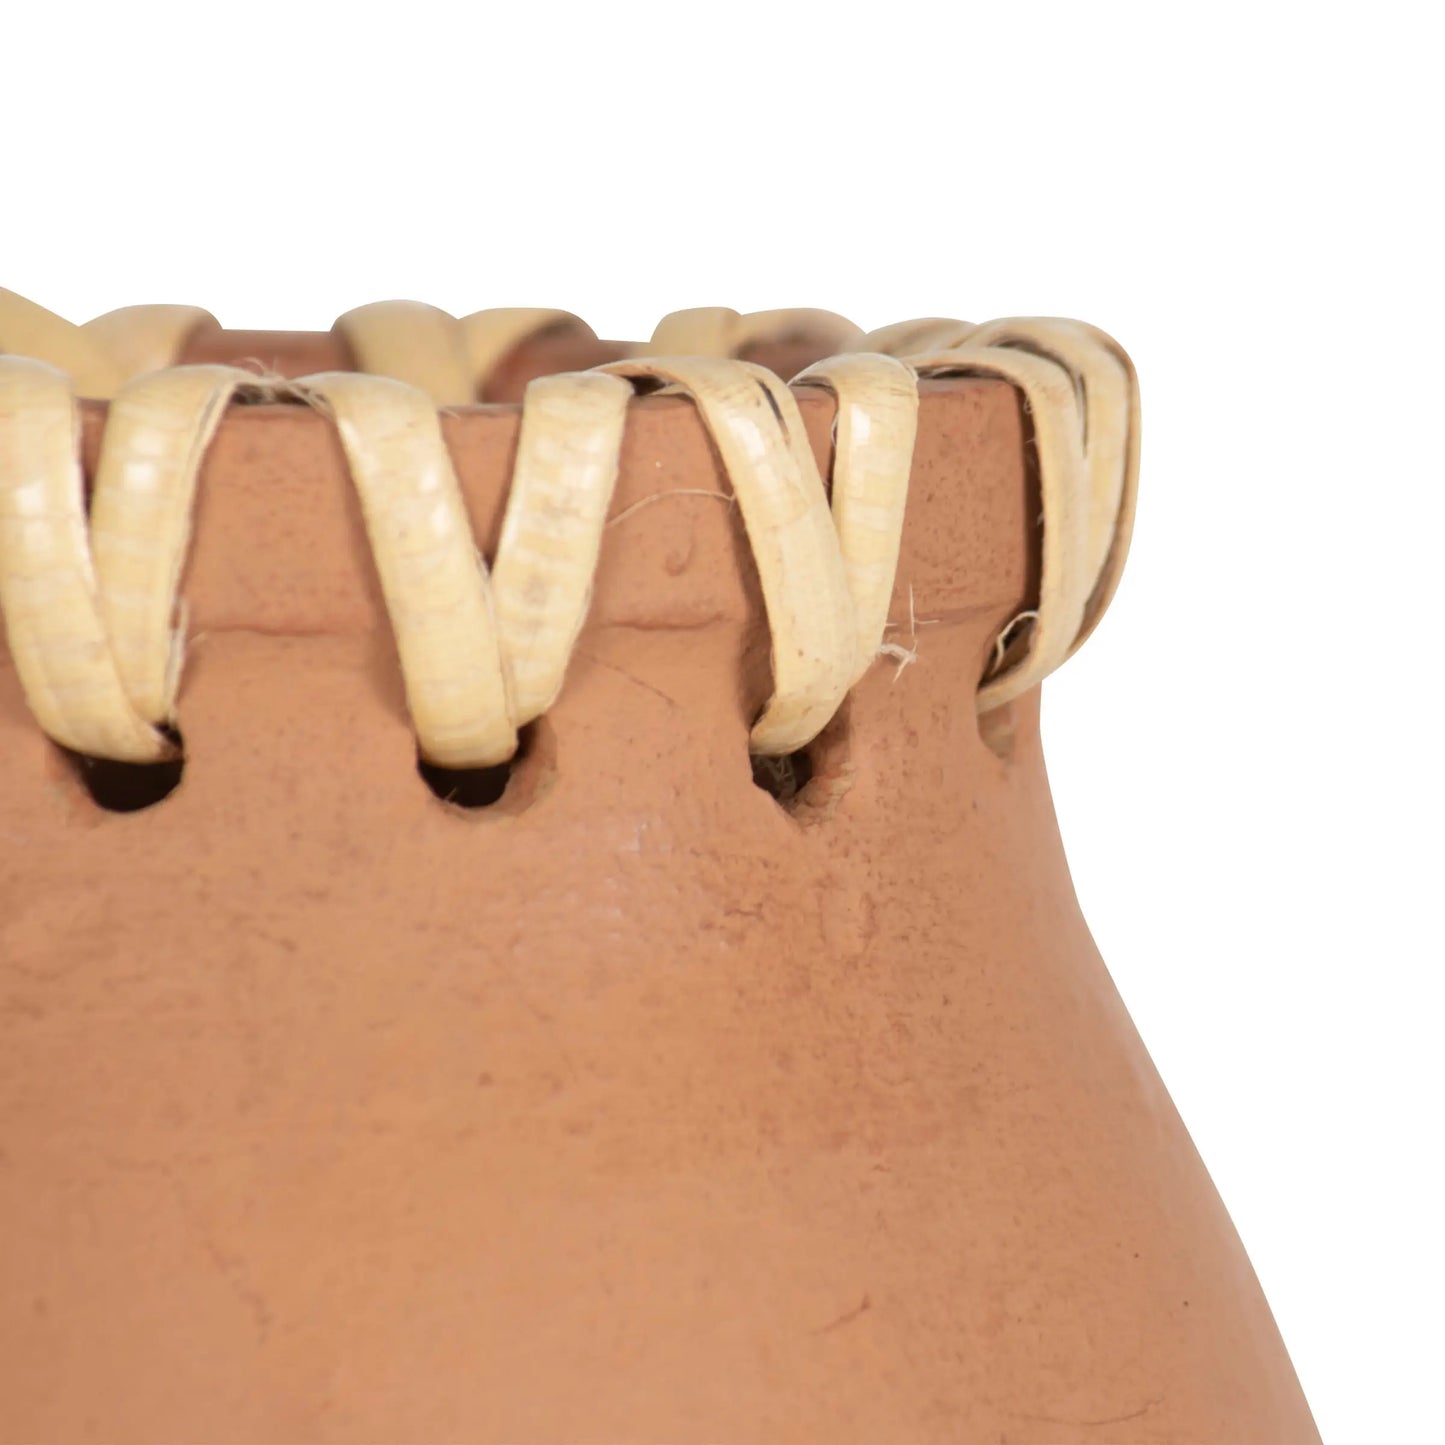 Load image into Gallery viewer, Mesa Terracotta Vase
